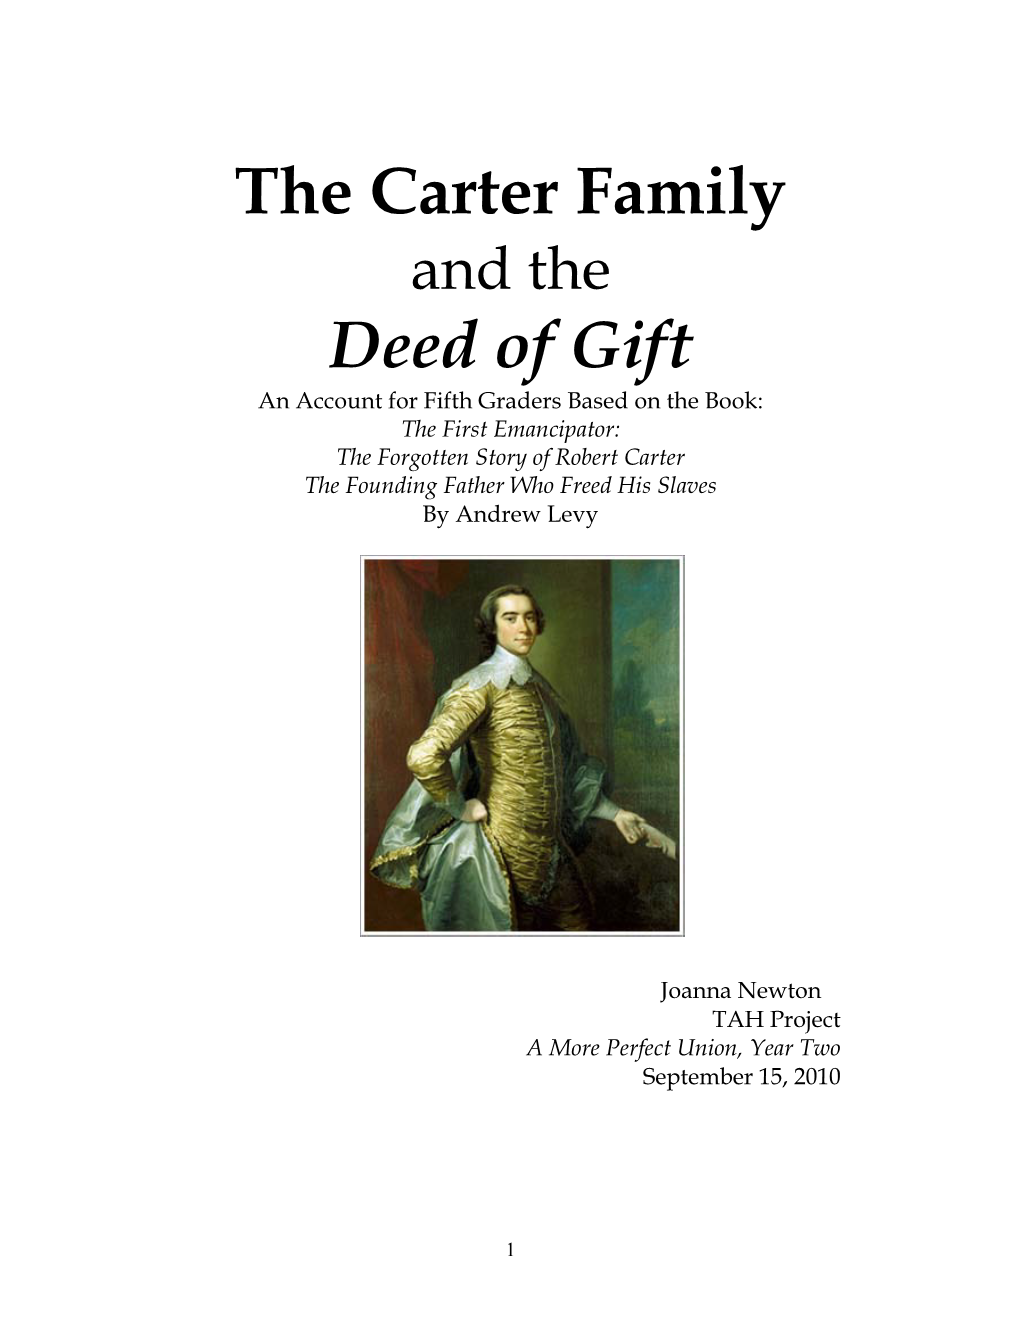 The Carter Family Deed of Gift